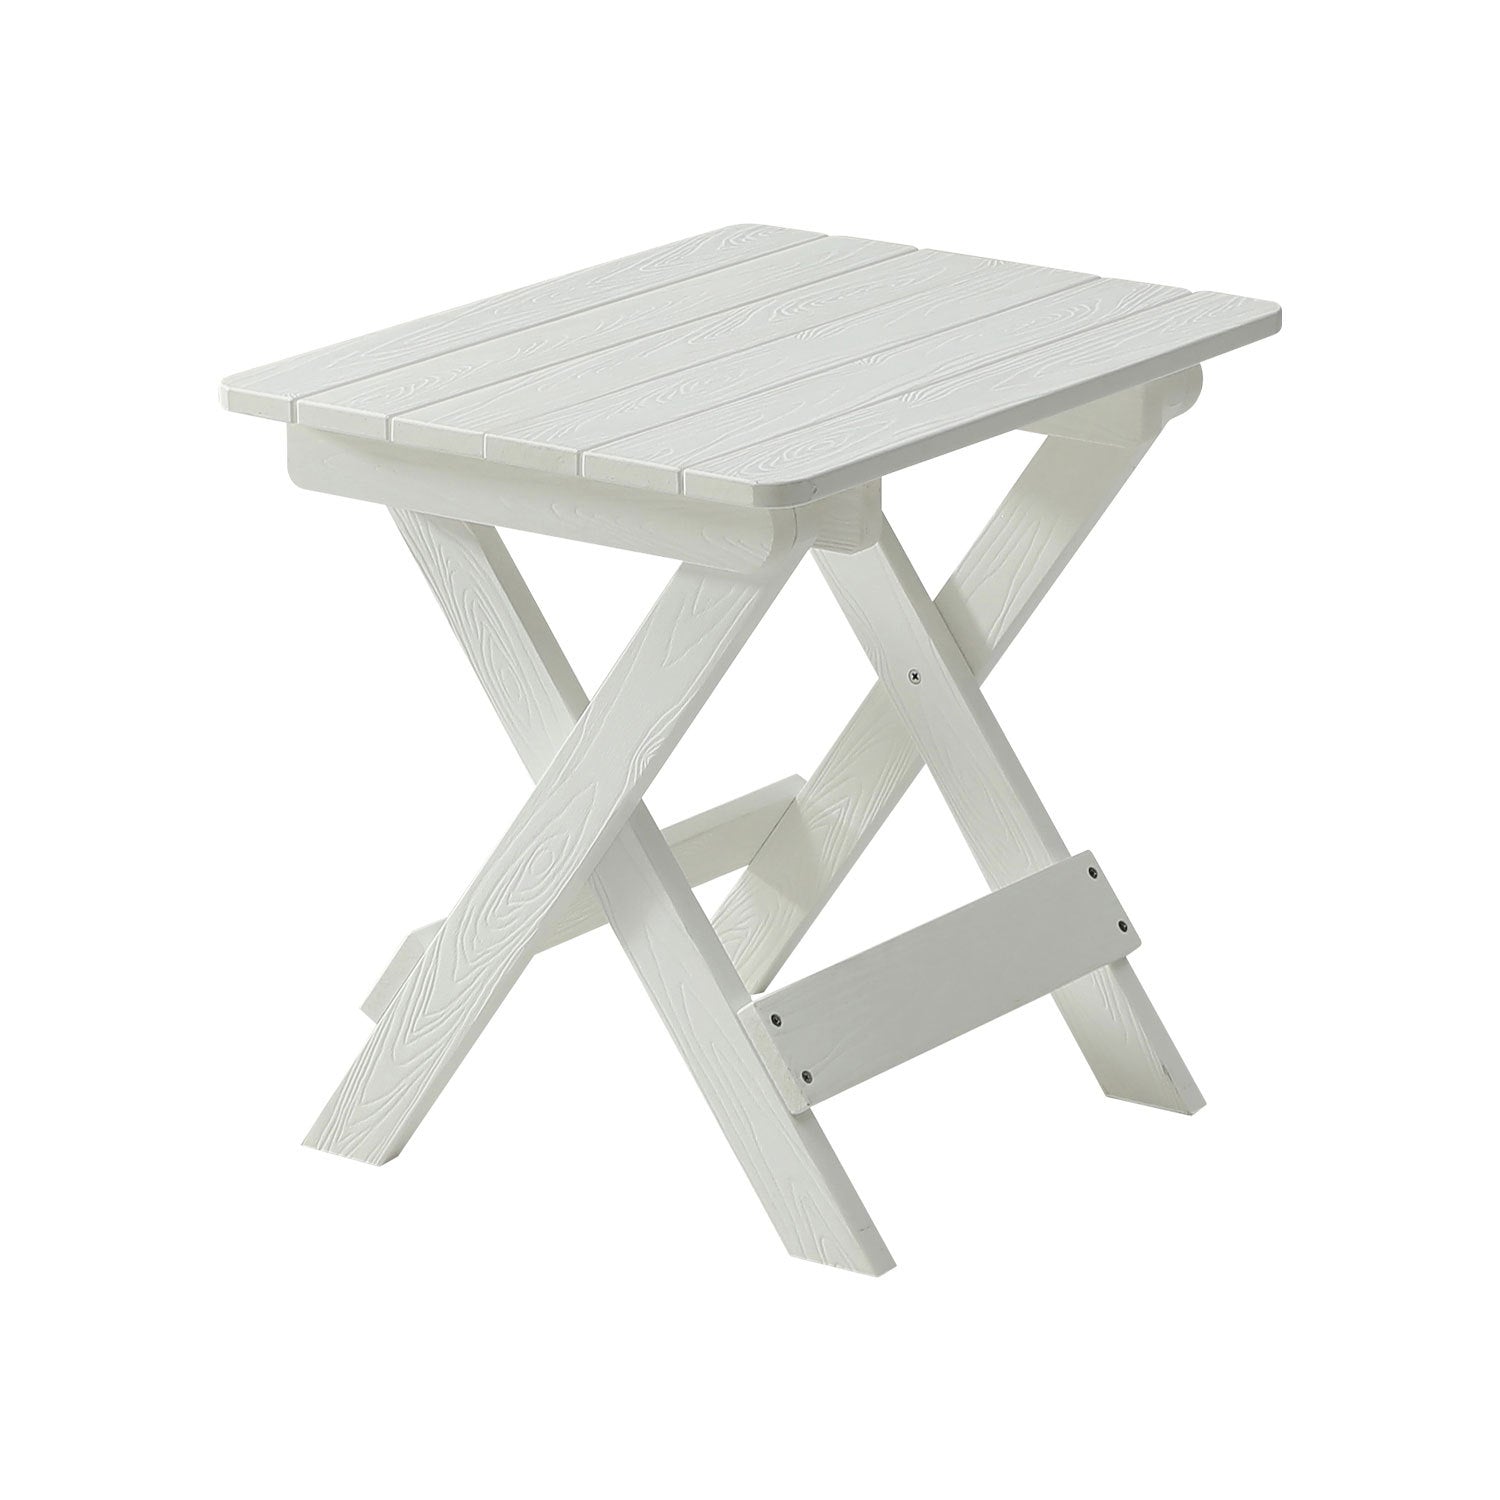 HIPS Foldable Small Table and Chair Set with 2 Chairs white-hdpe